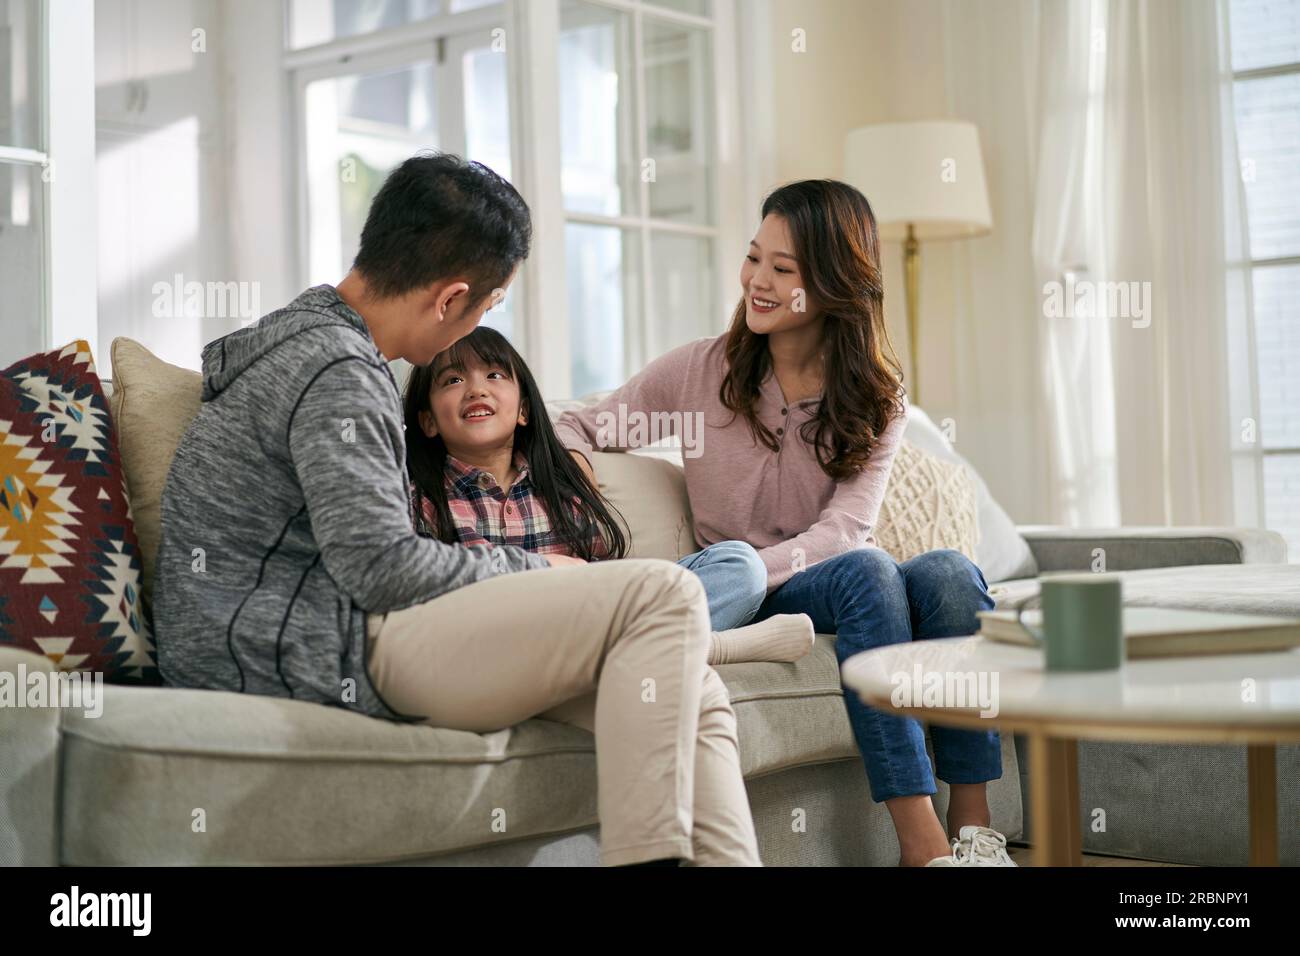 young asian mother and father sitting on family couch at home having a pleasant conversation with daughter Stock Photo